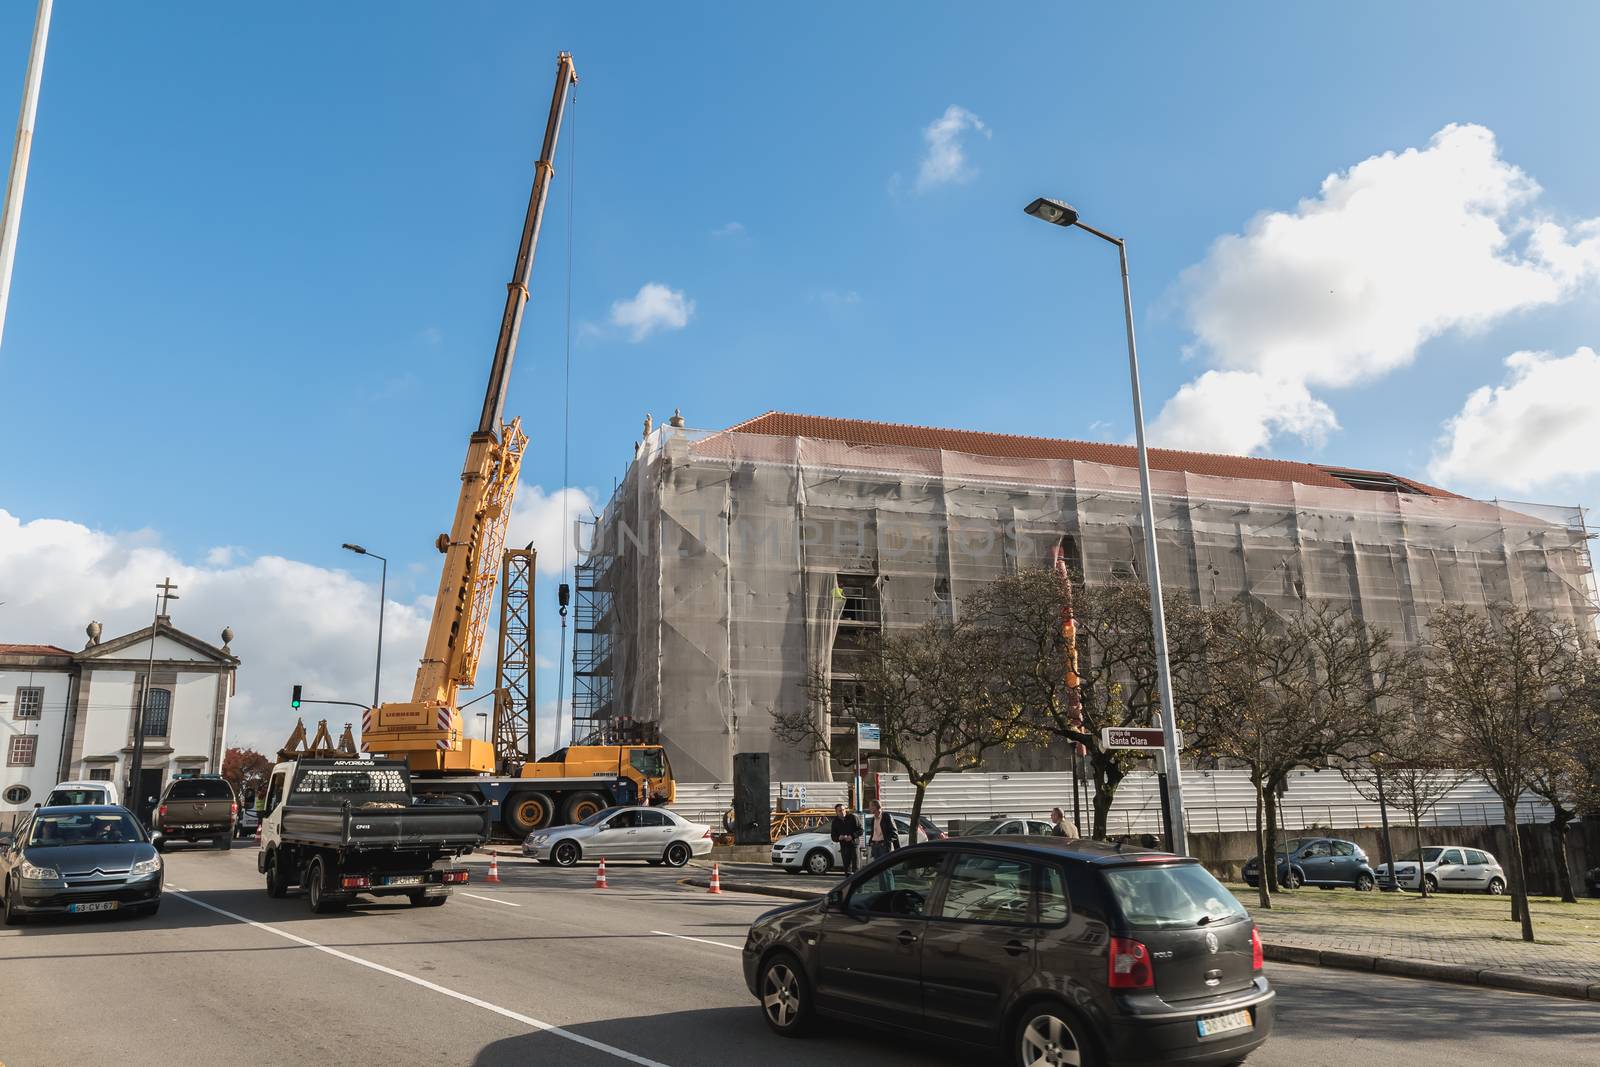 renovation site with a crane in operation and street atmosphere  by AtlanticEUROSTOXX